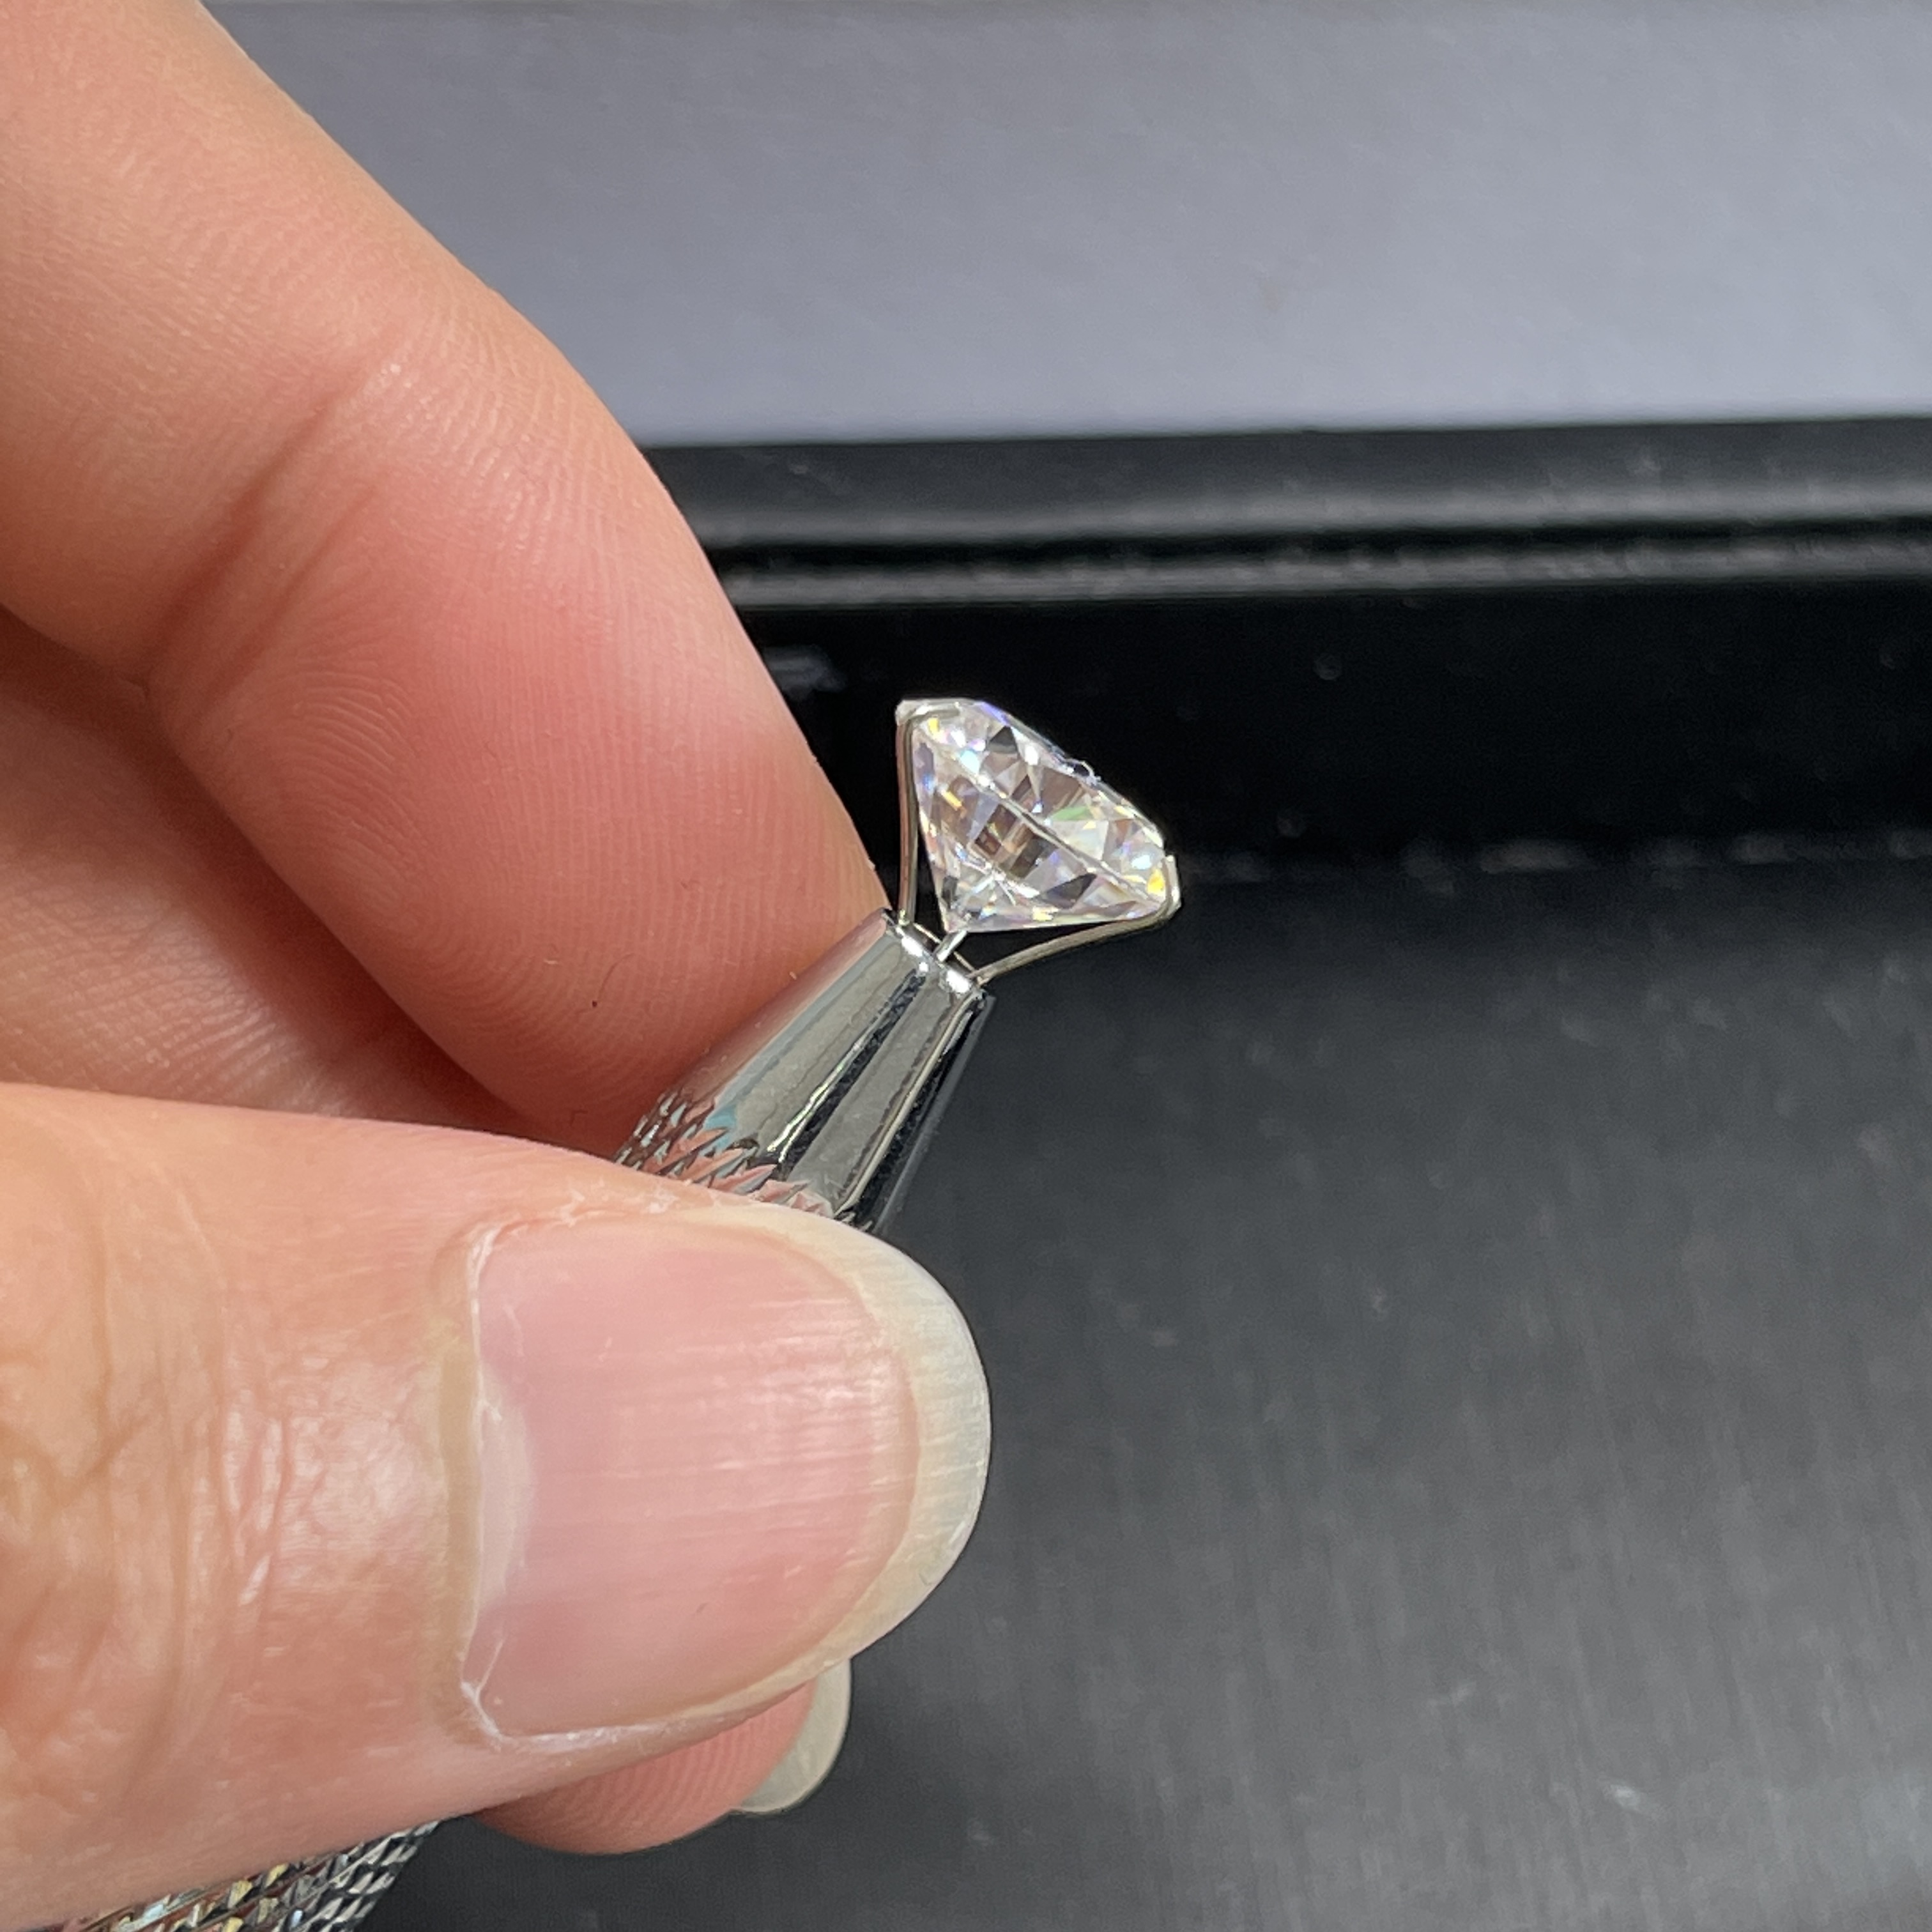 LOTUSMAPLE 0.1CT - 7CT color E clarity FL lab grown real moissanite high quality round brilliant cut test positive each one ≥0.5CT including certificate with girdle code